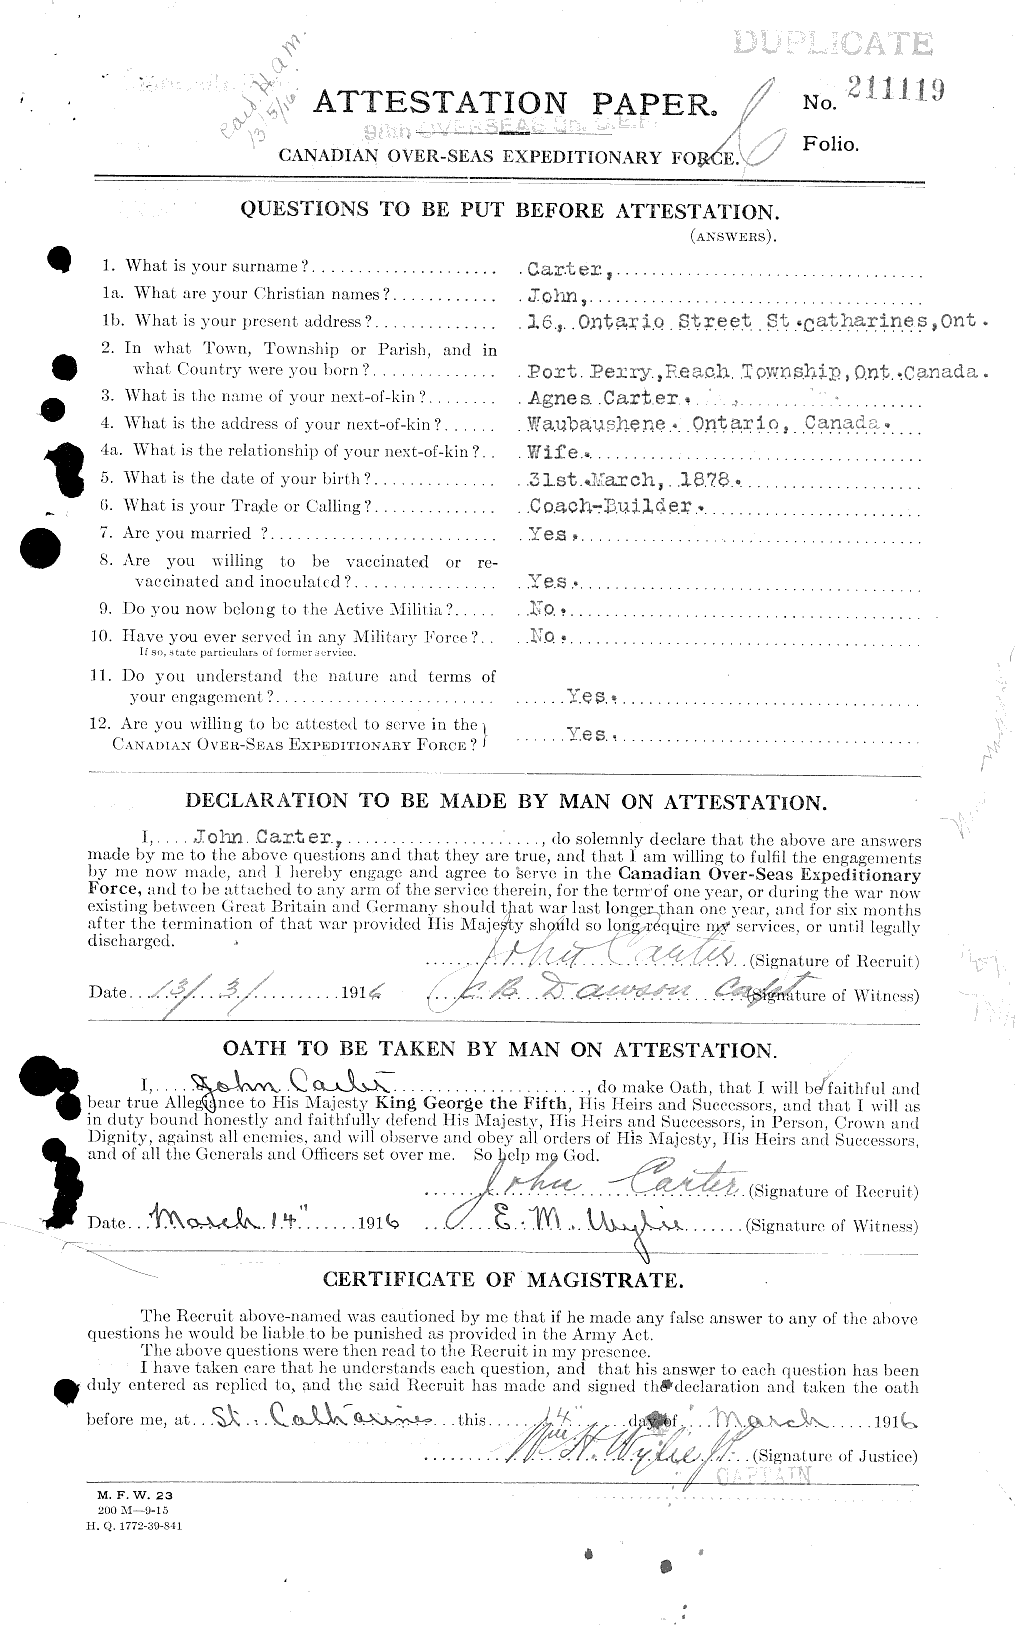 Personnel Records of the First World War - CEF 006020a